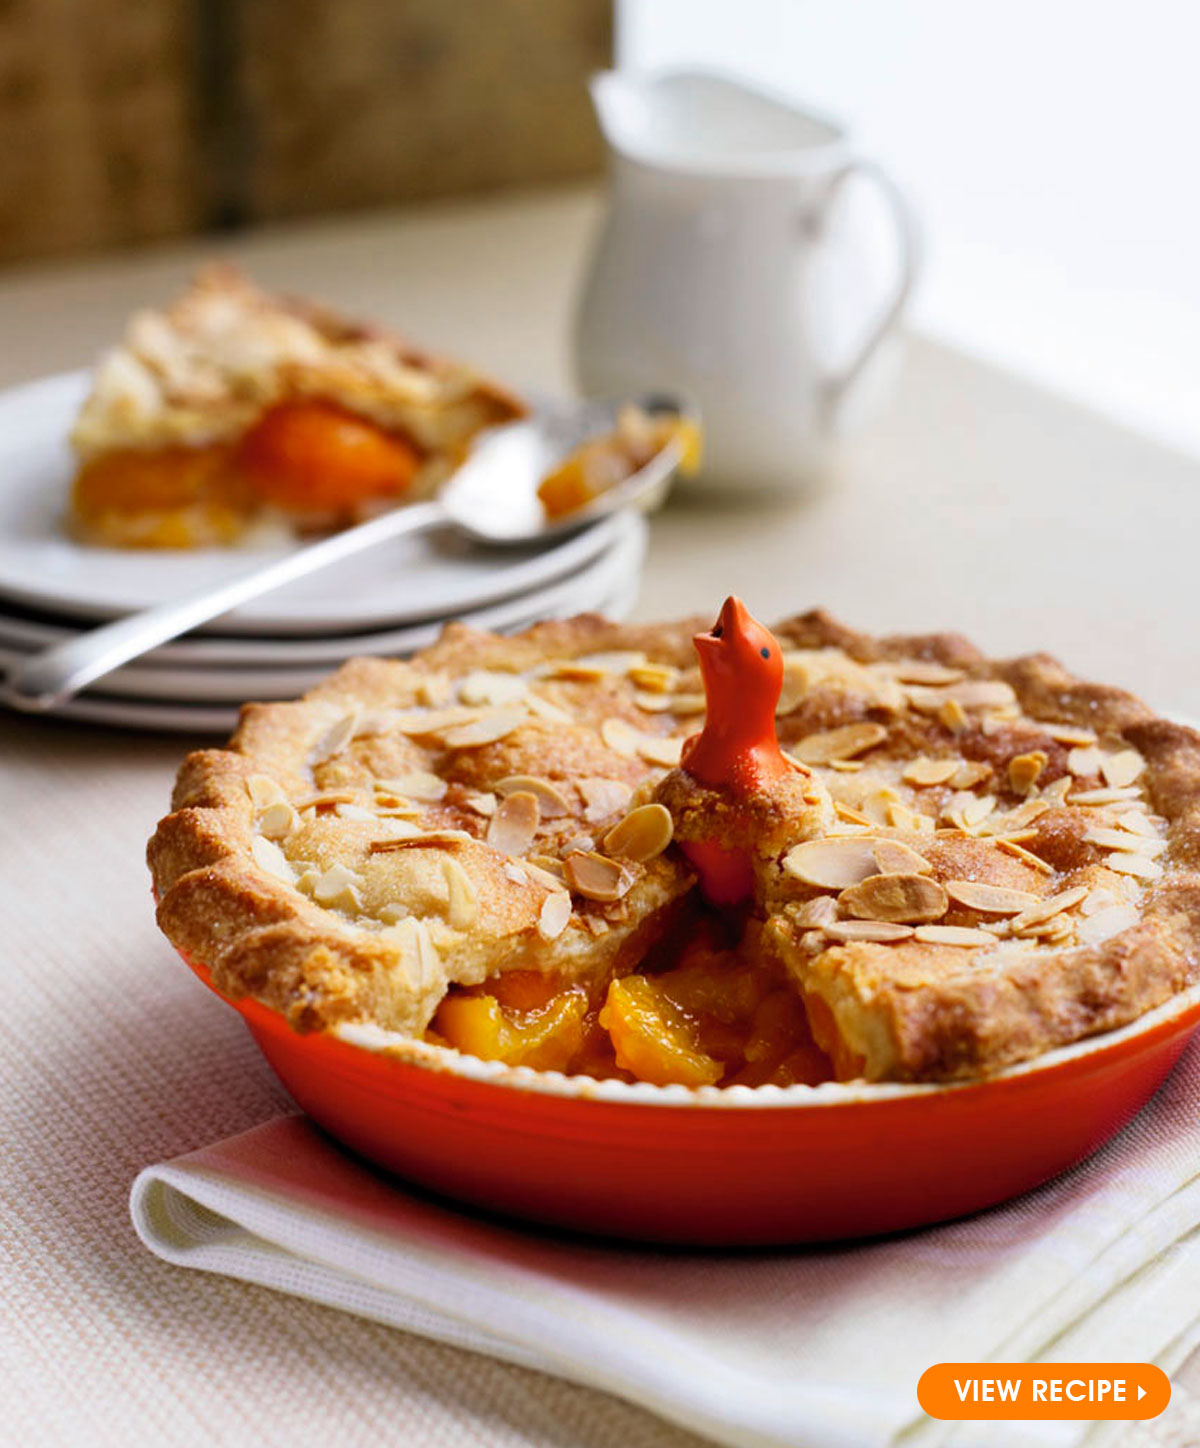 Apricot and Almond Pie